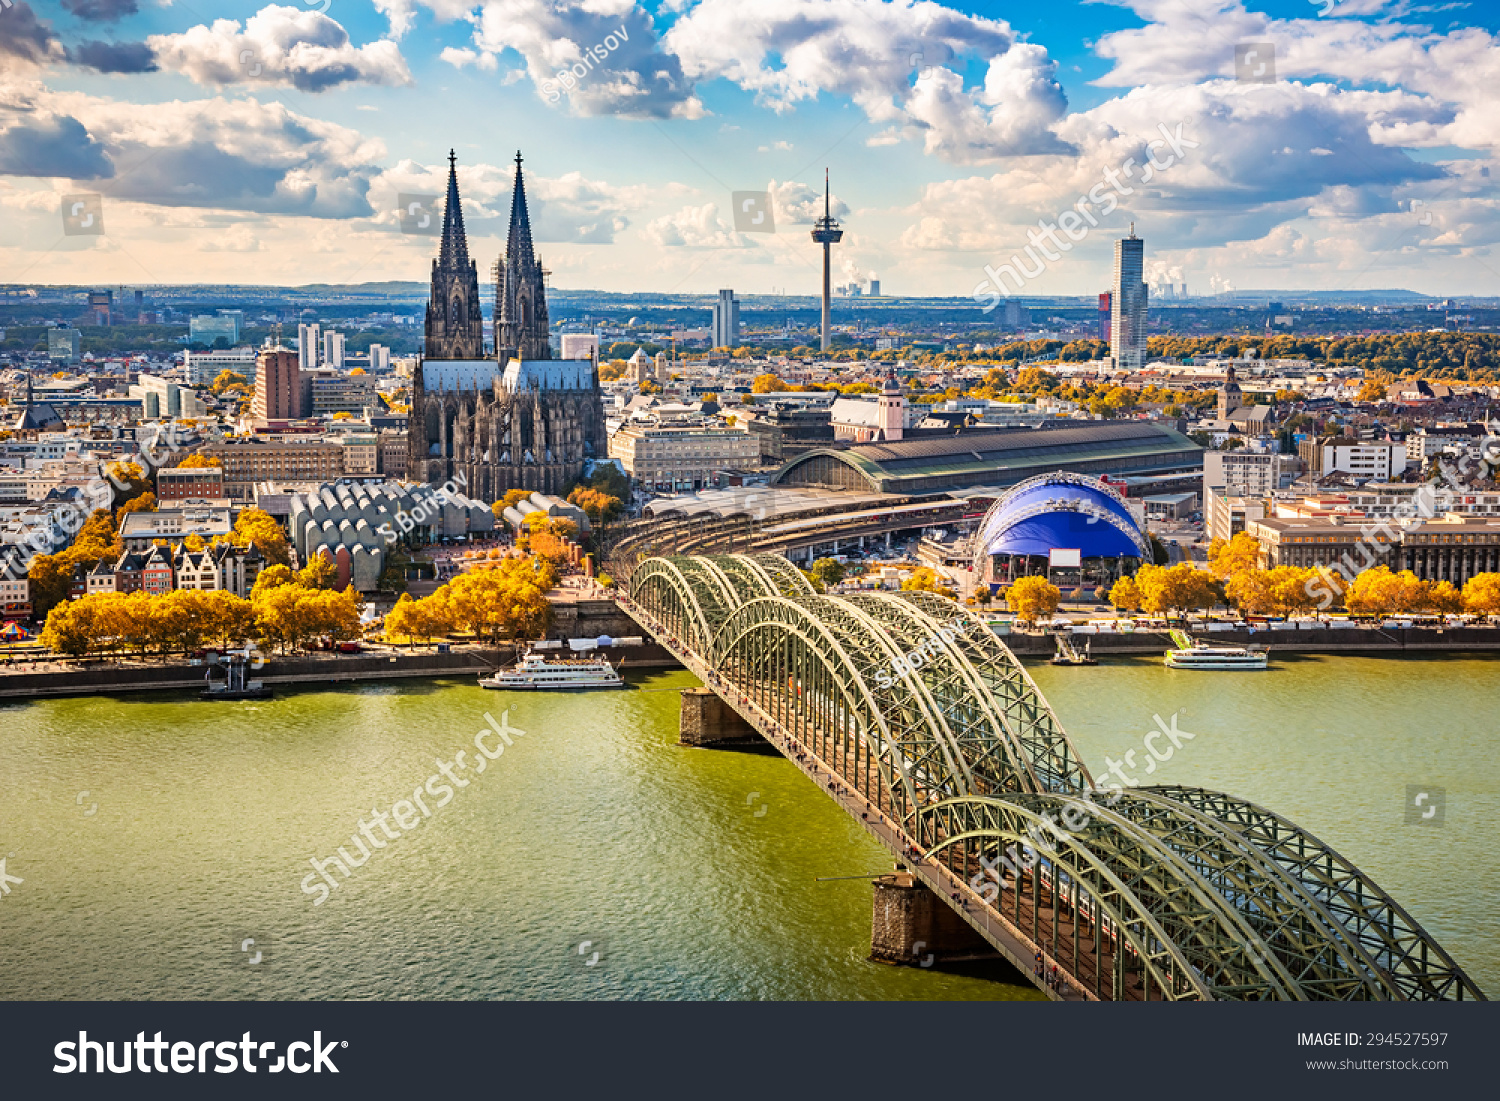 Aerial View Of Cologne, Germany Stock Photo 294527597 : Shutterstock